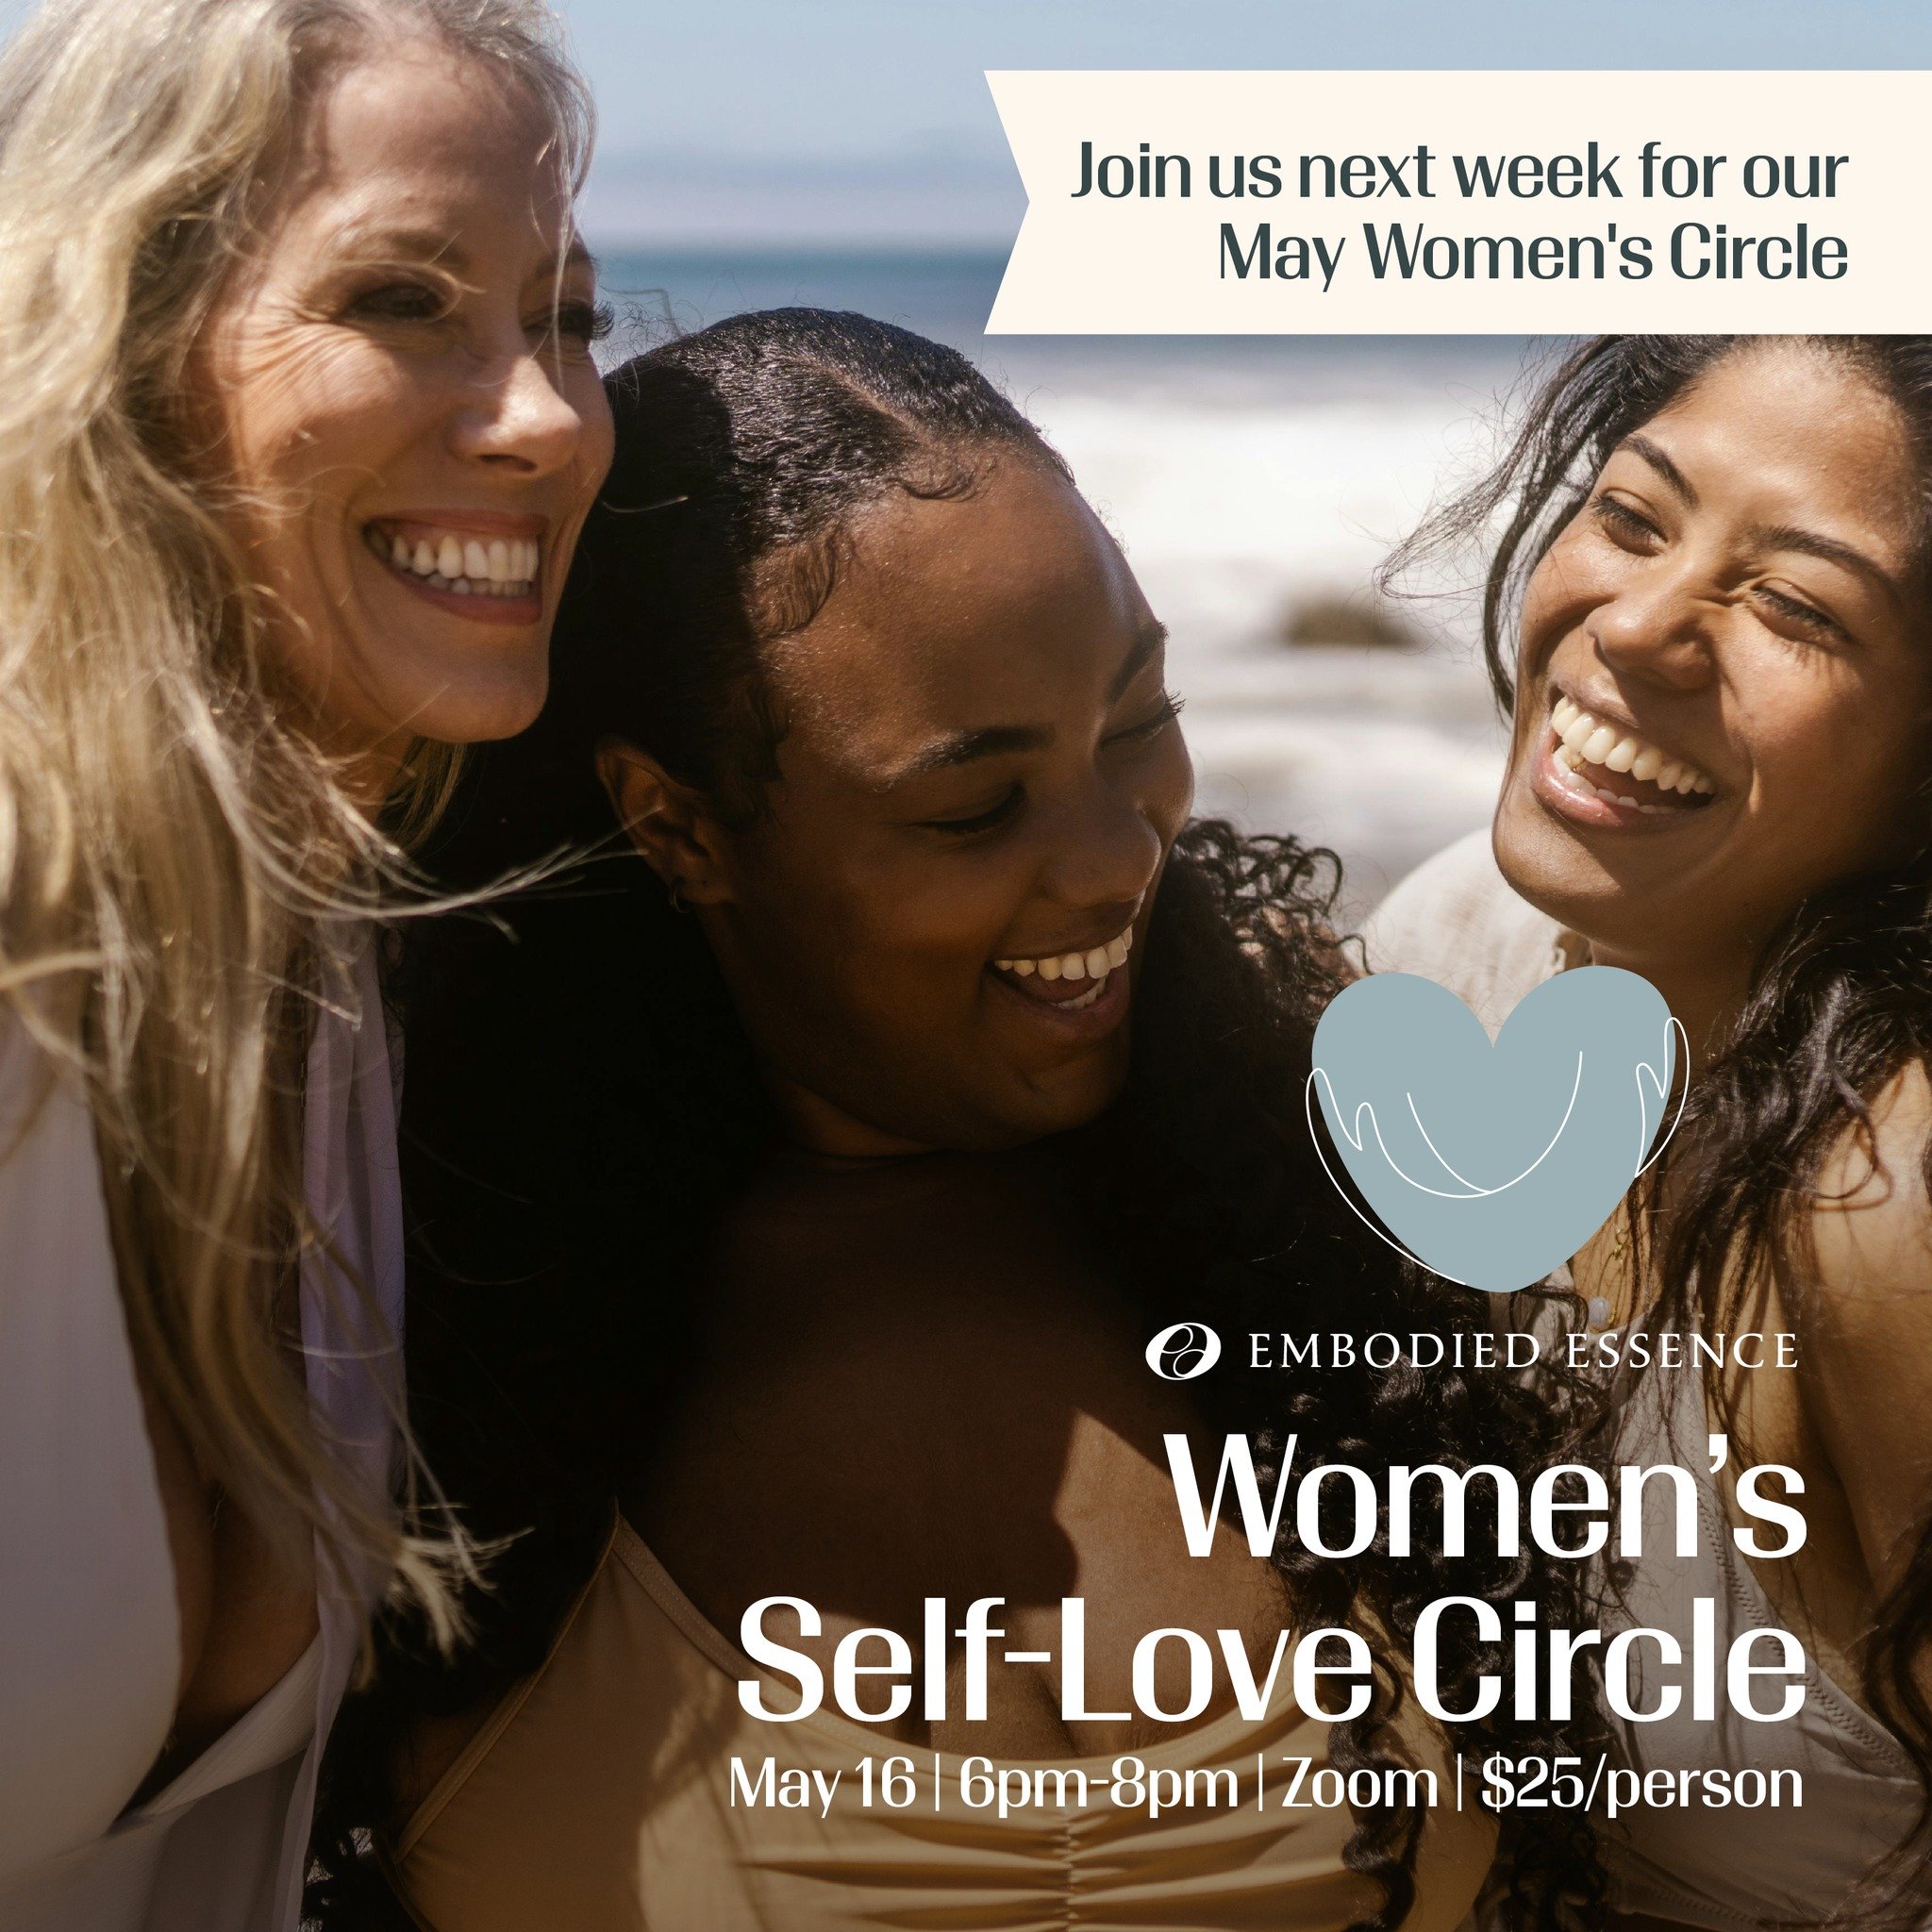 Are you seeking a circle where you can be heard, understood, and uplifted? 

Join us next week for an evening filled with genuine conversations, meaningful reflections, somatic practices, and empowering support. Find your place among women who uplift